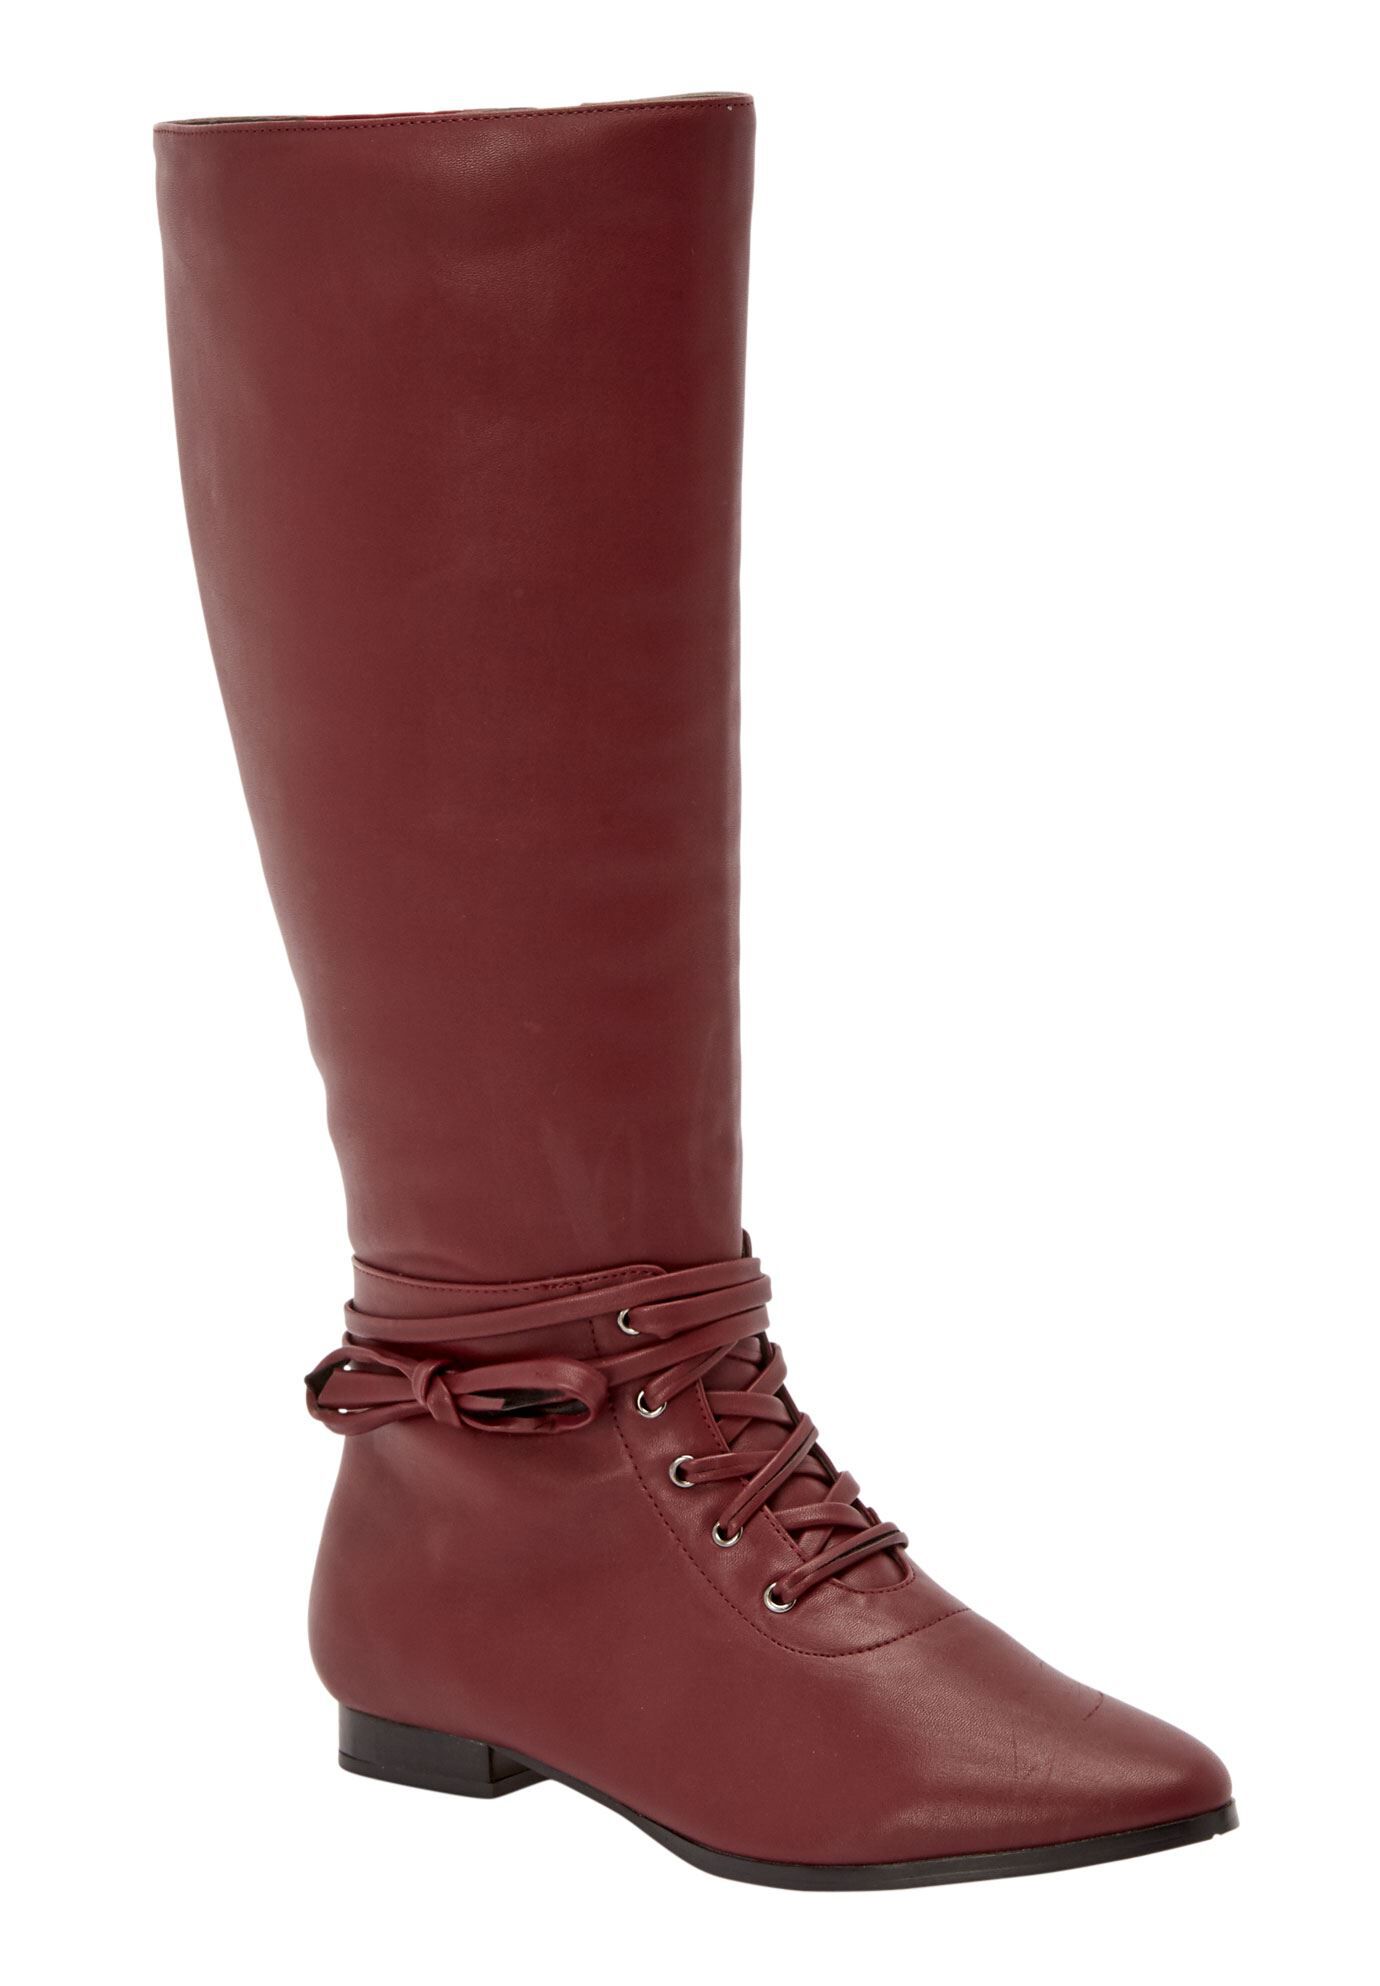 The Audrina Wide Calf Boot by 